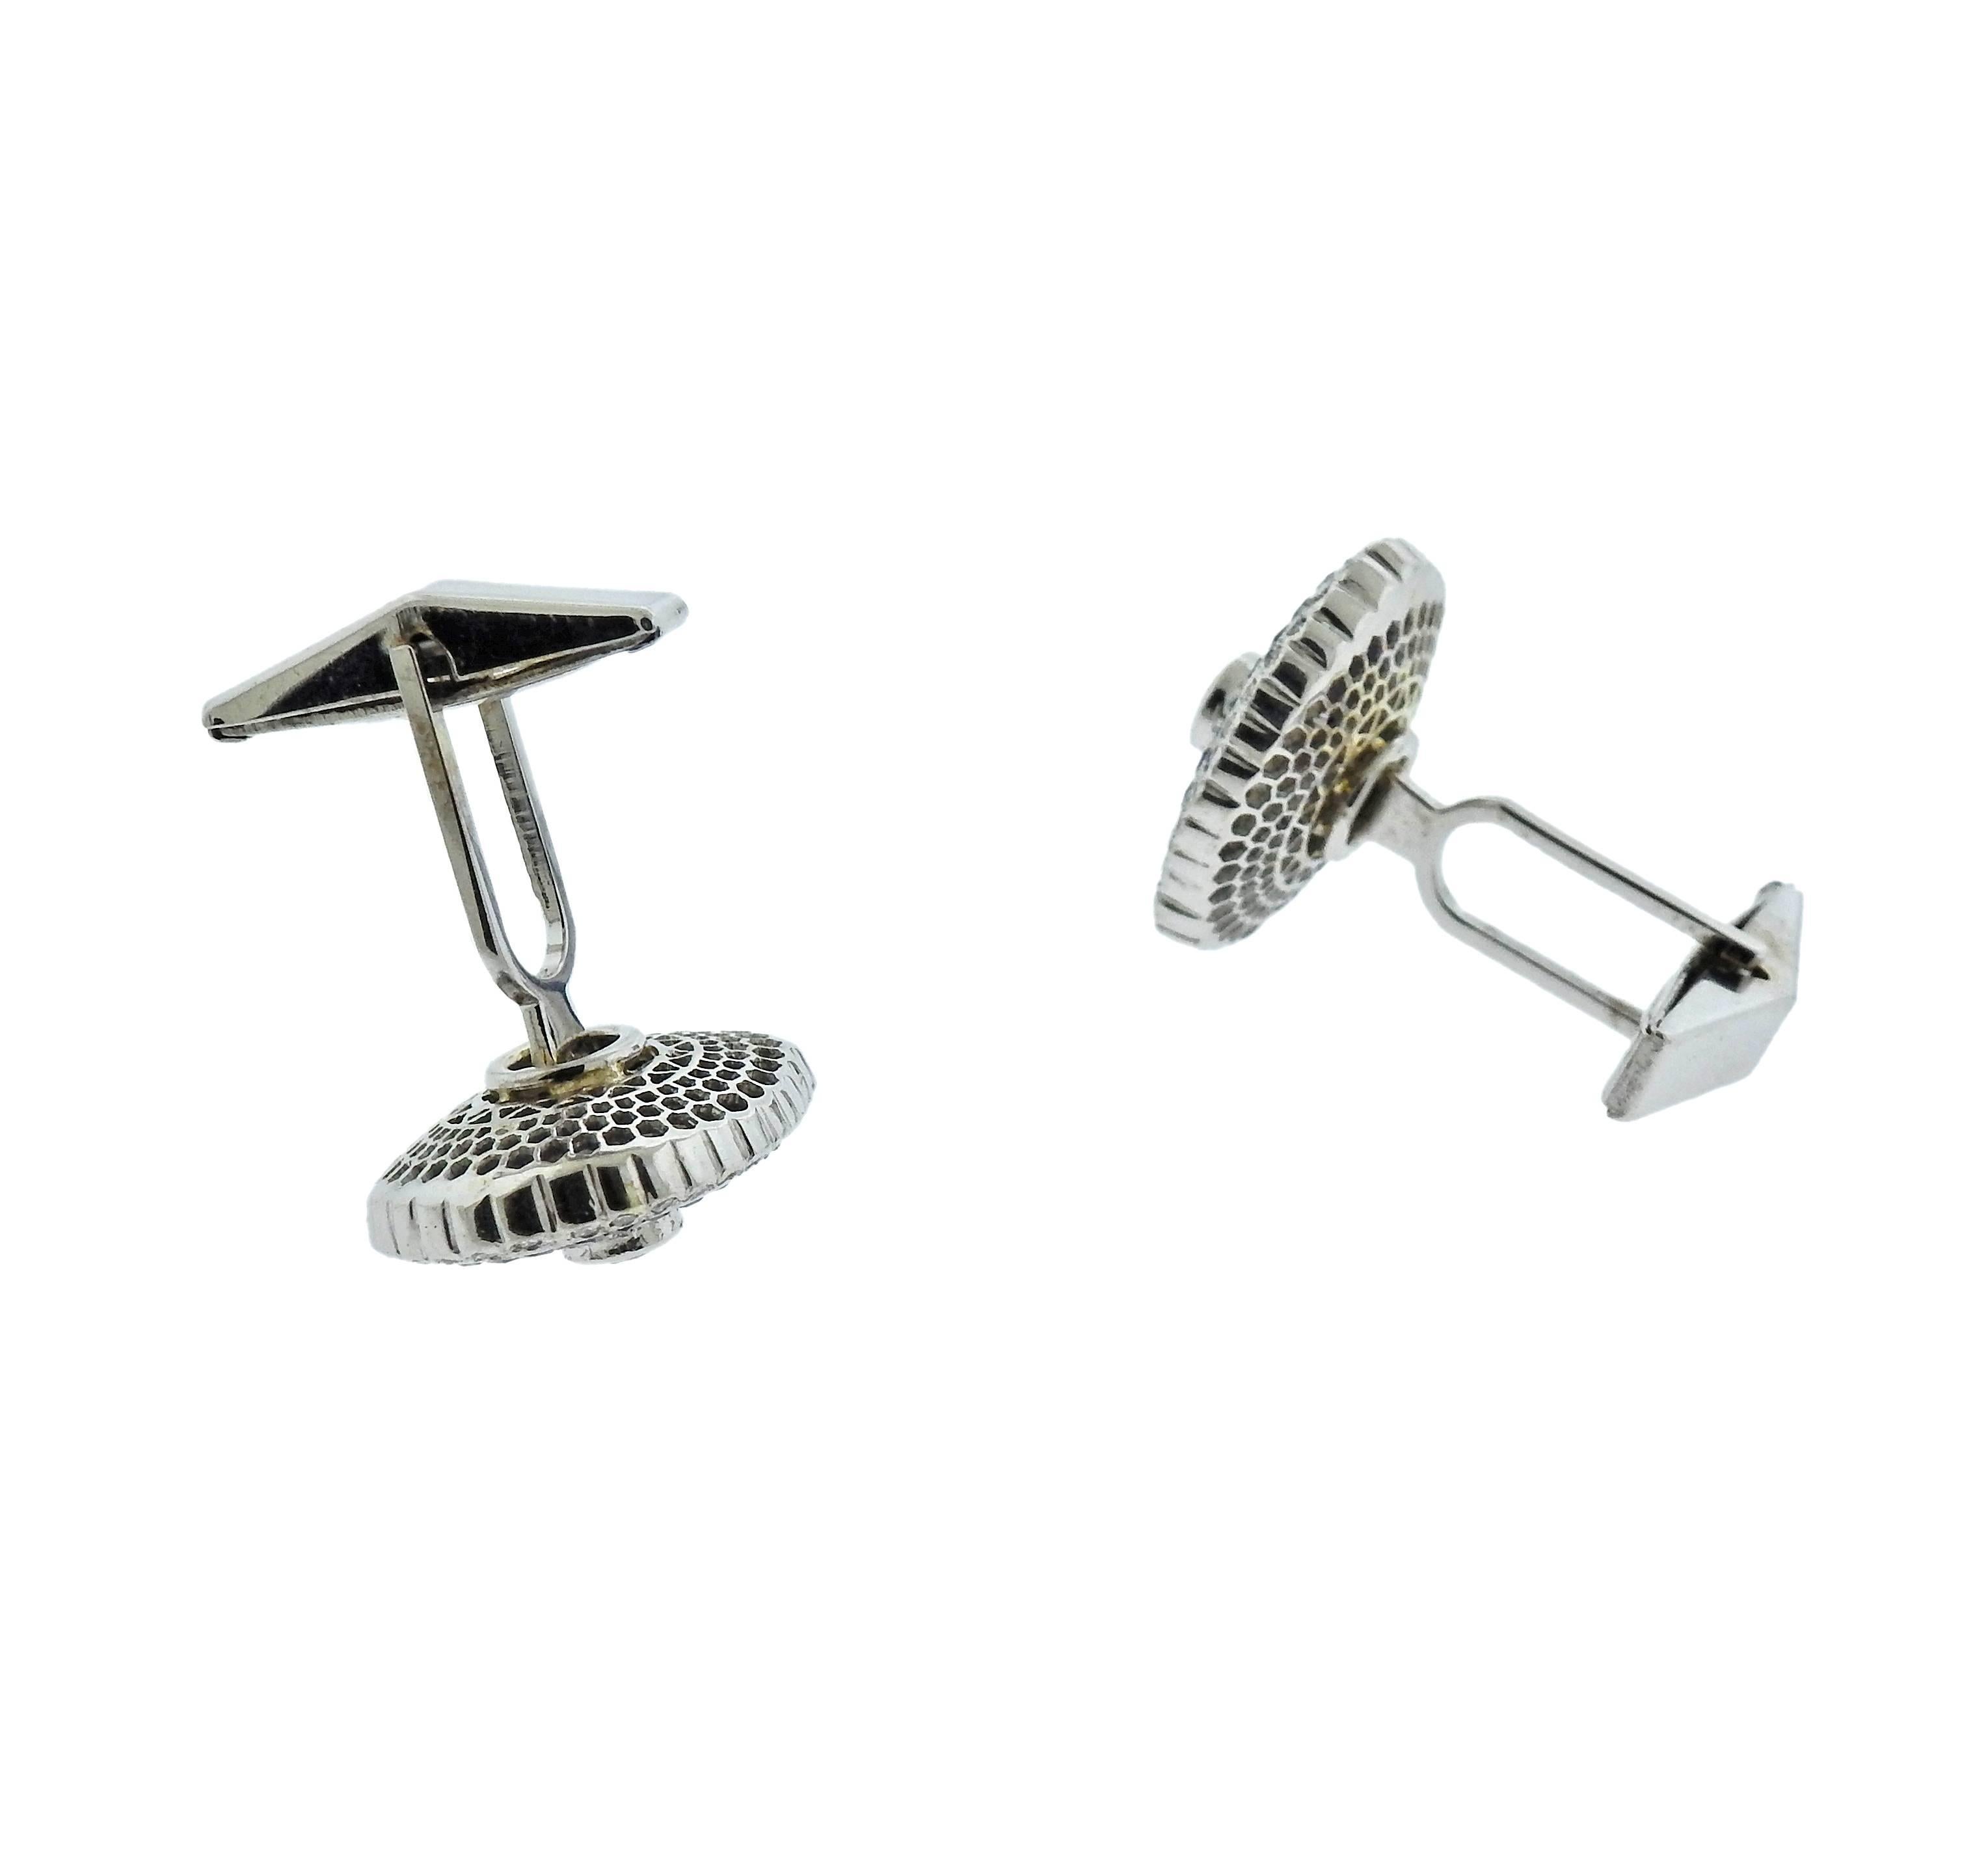 Pair of 18k white gold dressy cufflinks, set with French cut sapphires and approx. 0.80ctw in VS-SI/G diamonds. Each top is 19mm x 16mm, weigh 10.9 grams. Marked 14k gold (hardware), top tested 18k. 